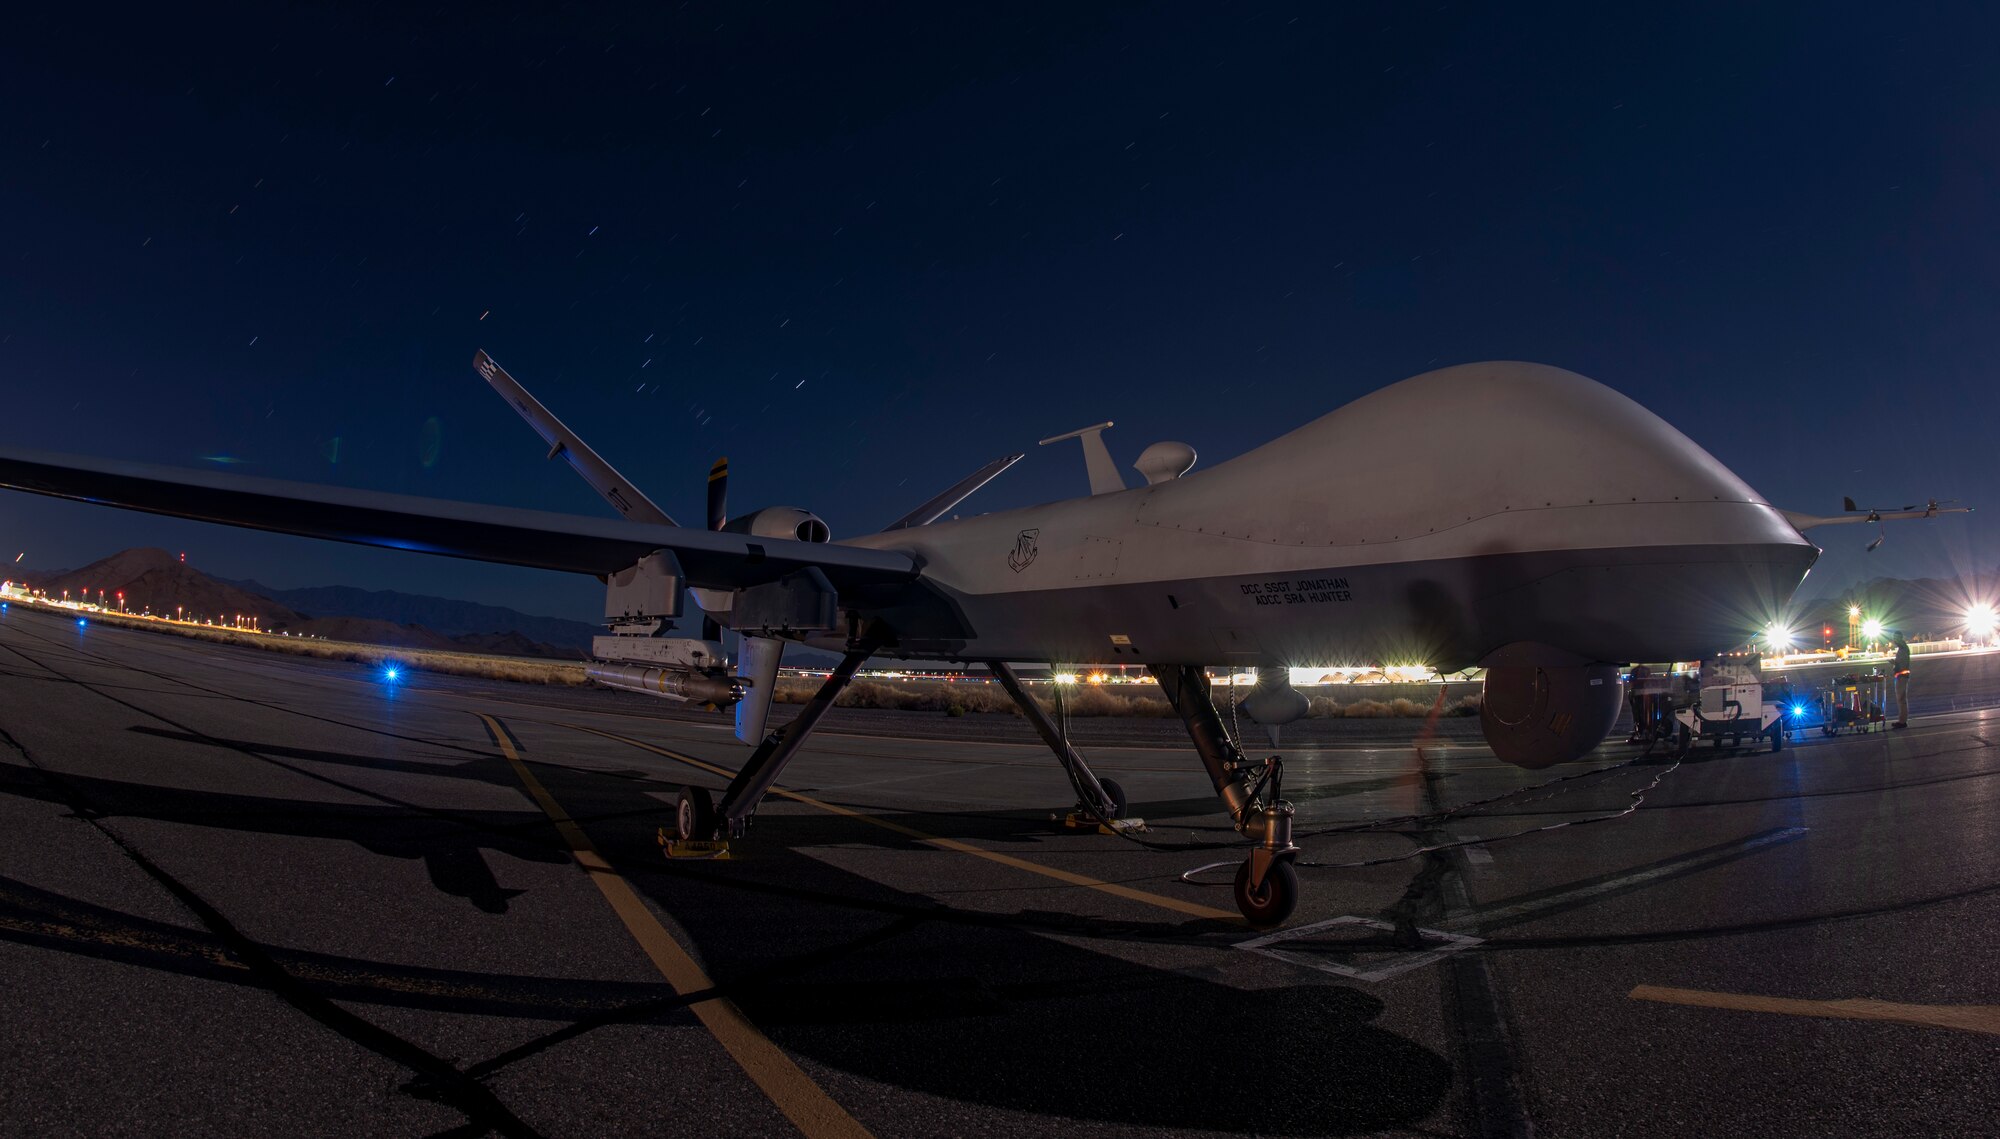 Image of an MQ-9 armed with an AIM-9X missile